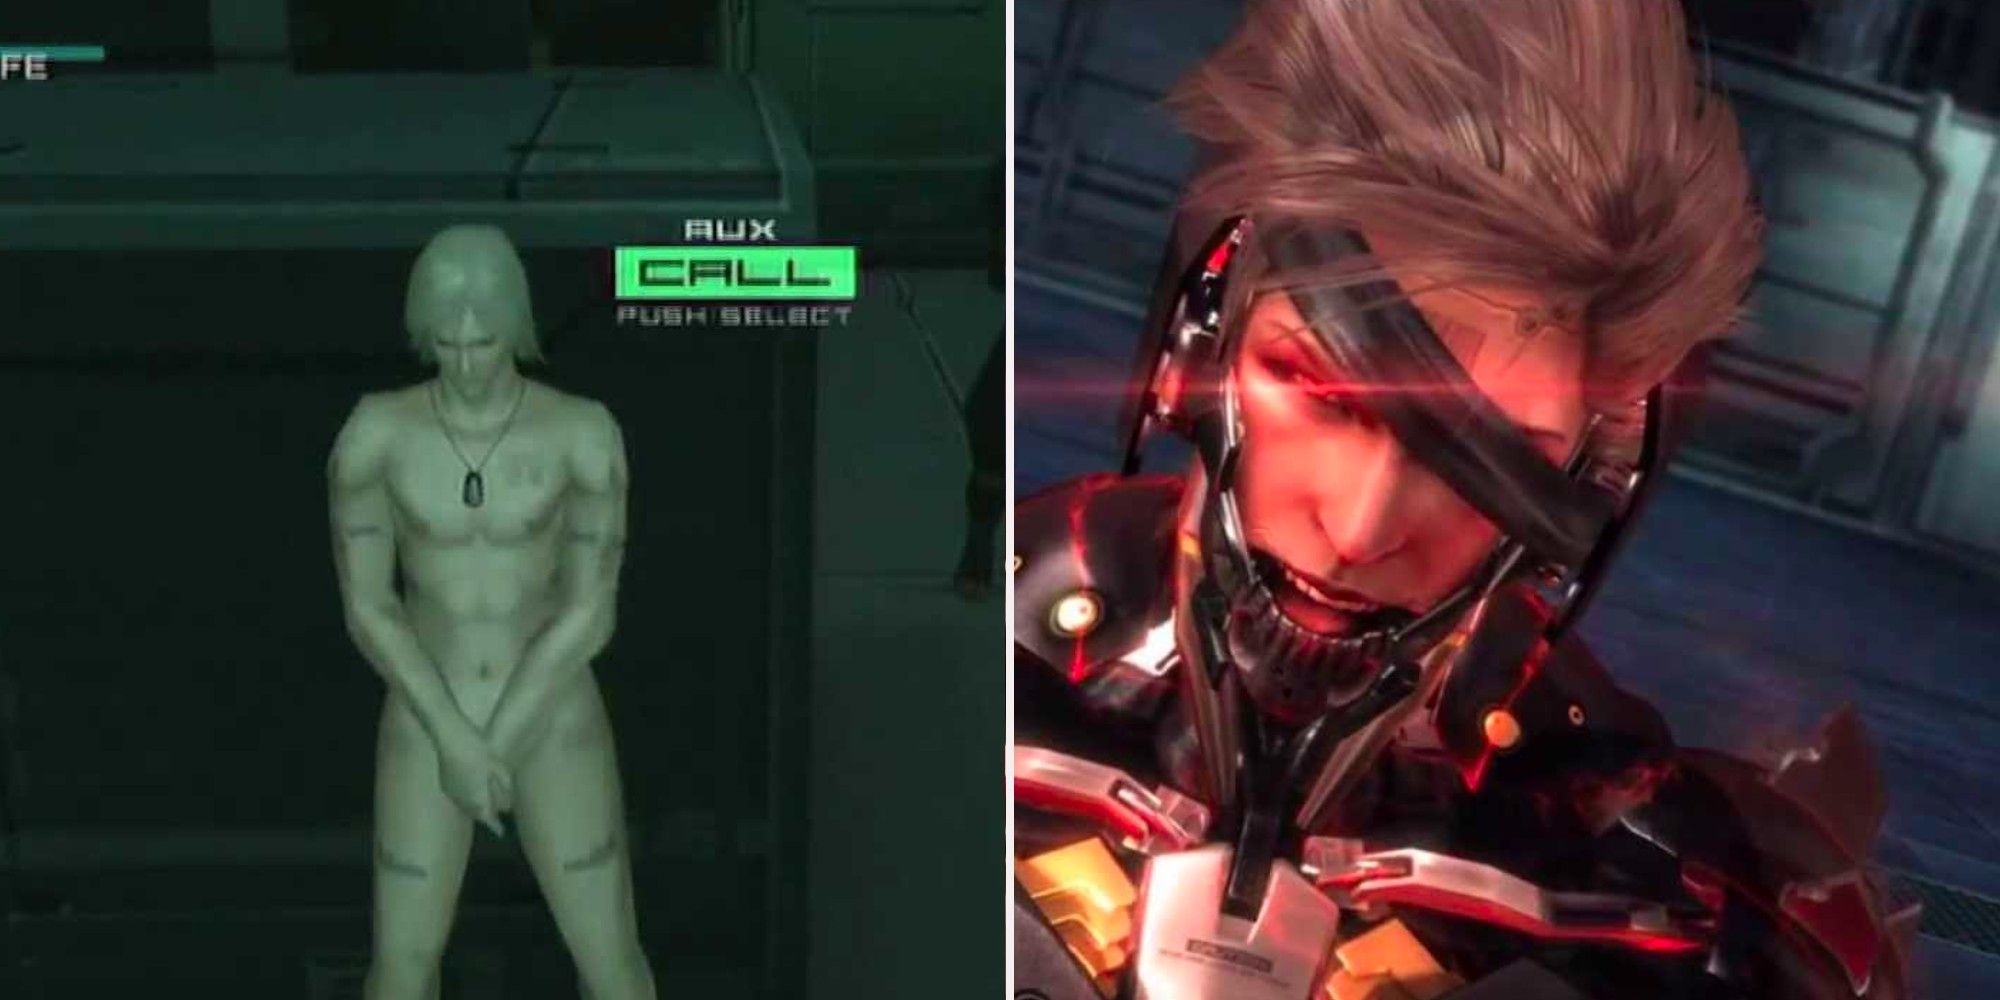 Raiden loses his clothes in Metal Gear Solid 2 and Raiden becomes Jack The Ripper in Metal Gear Rising Revenageance